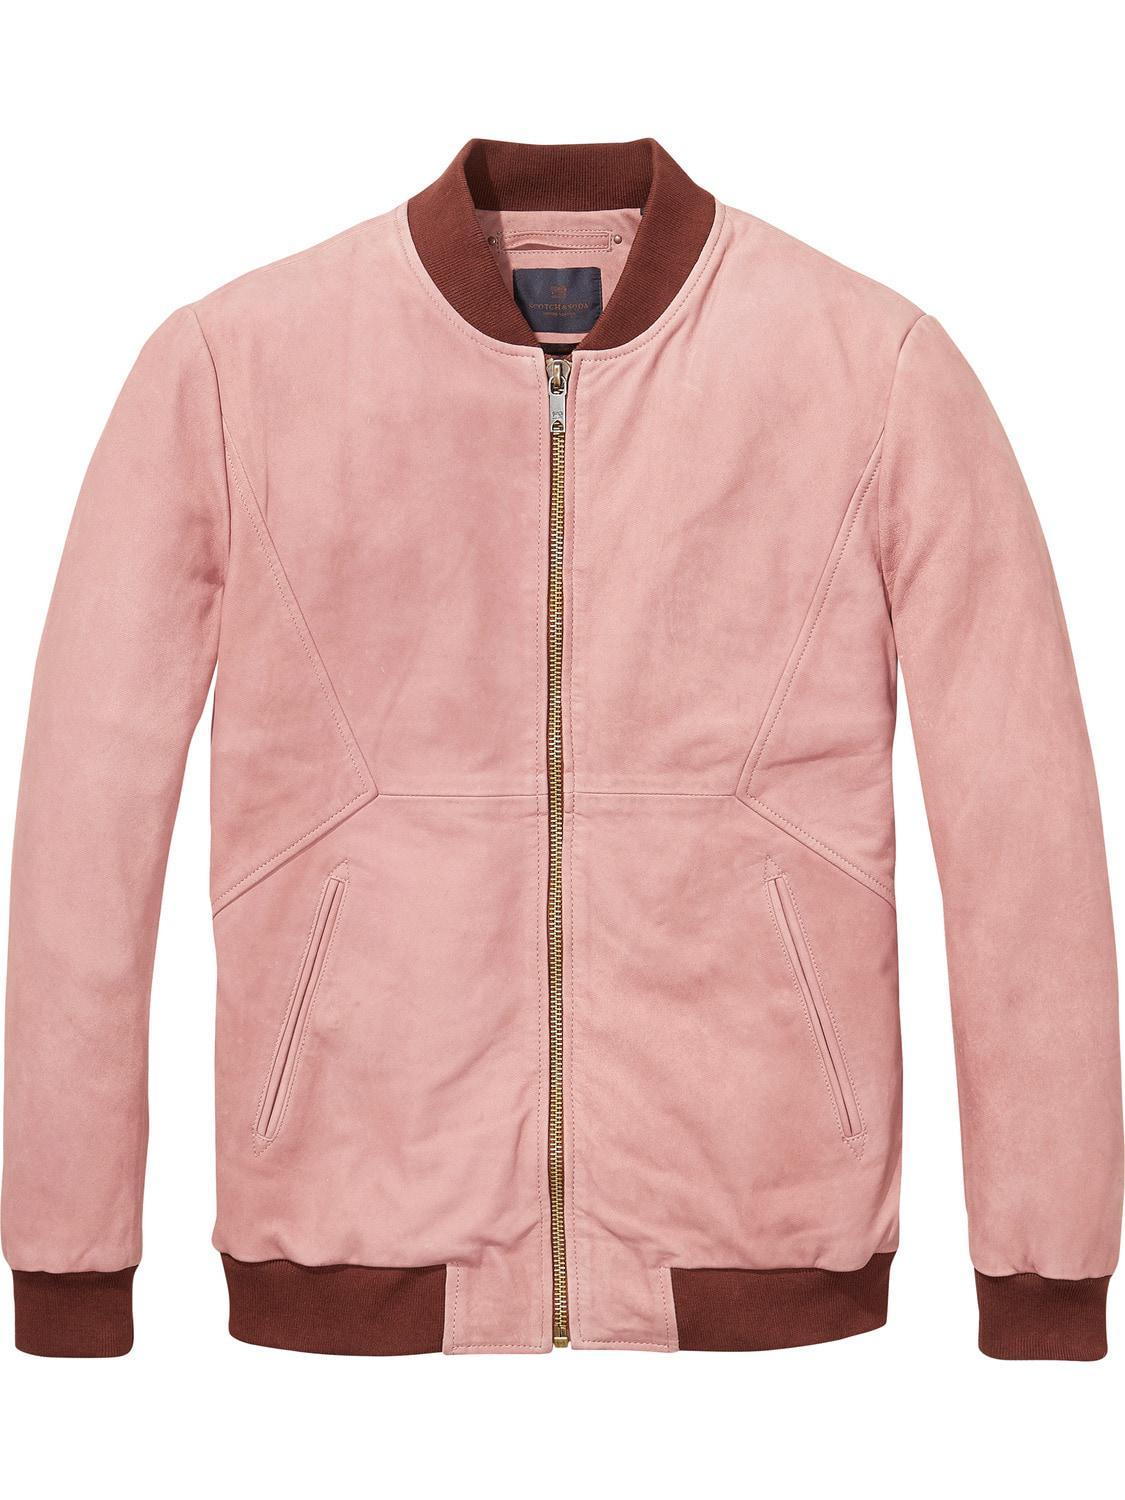 Scotch & Soda Suede Bomber Jacket in Pink for Men - Lyst